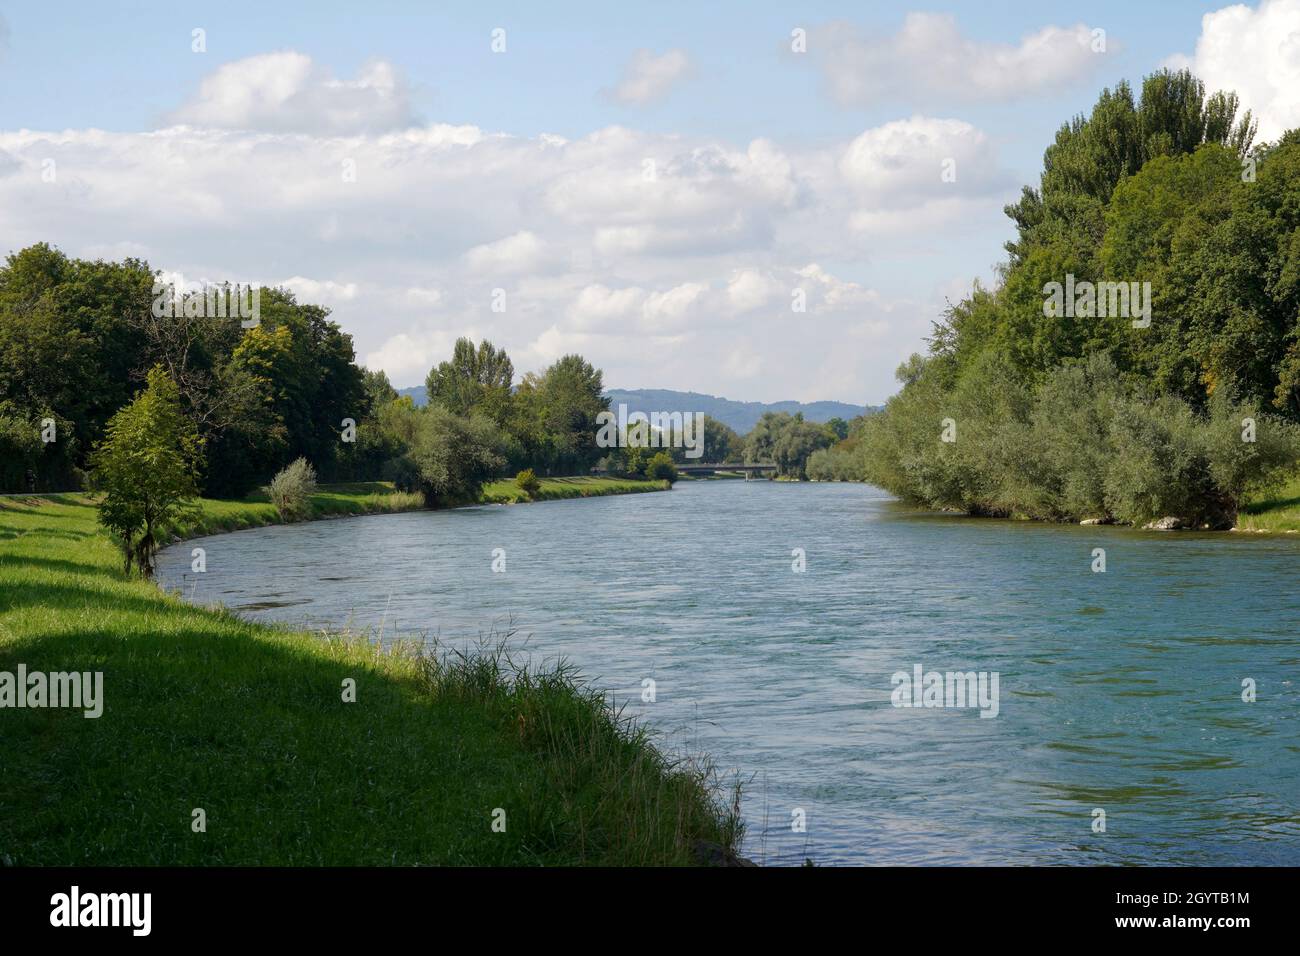 River Limmat in canton Zurich, Switzerland in summertime. There are trees on both banks and a walking path on the left side. Stock Photo